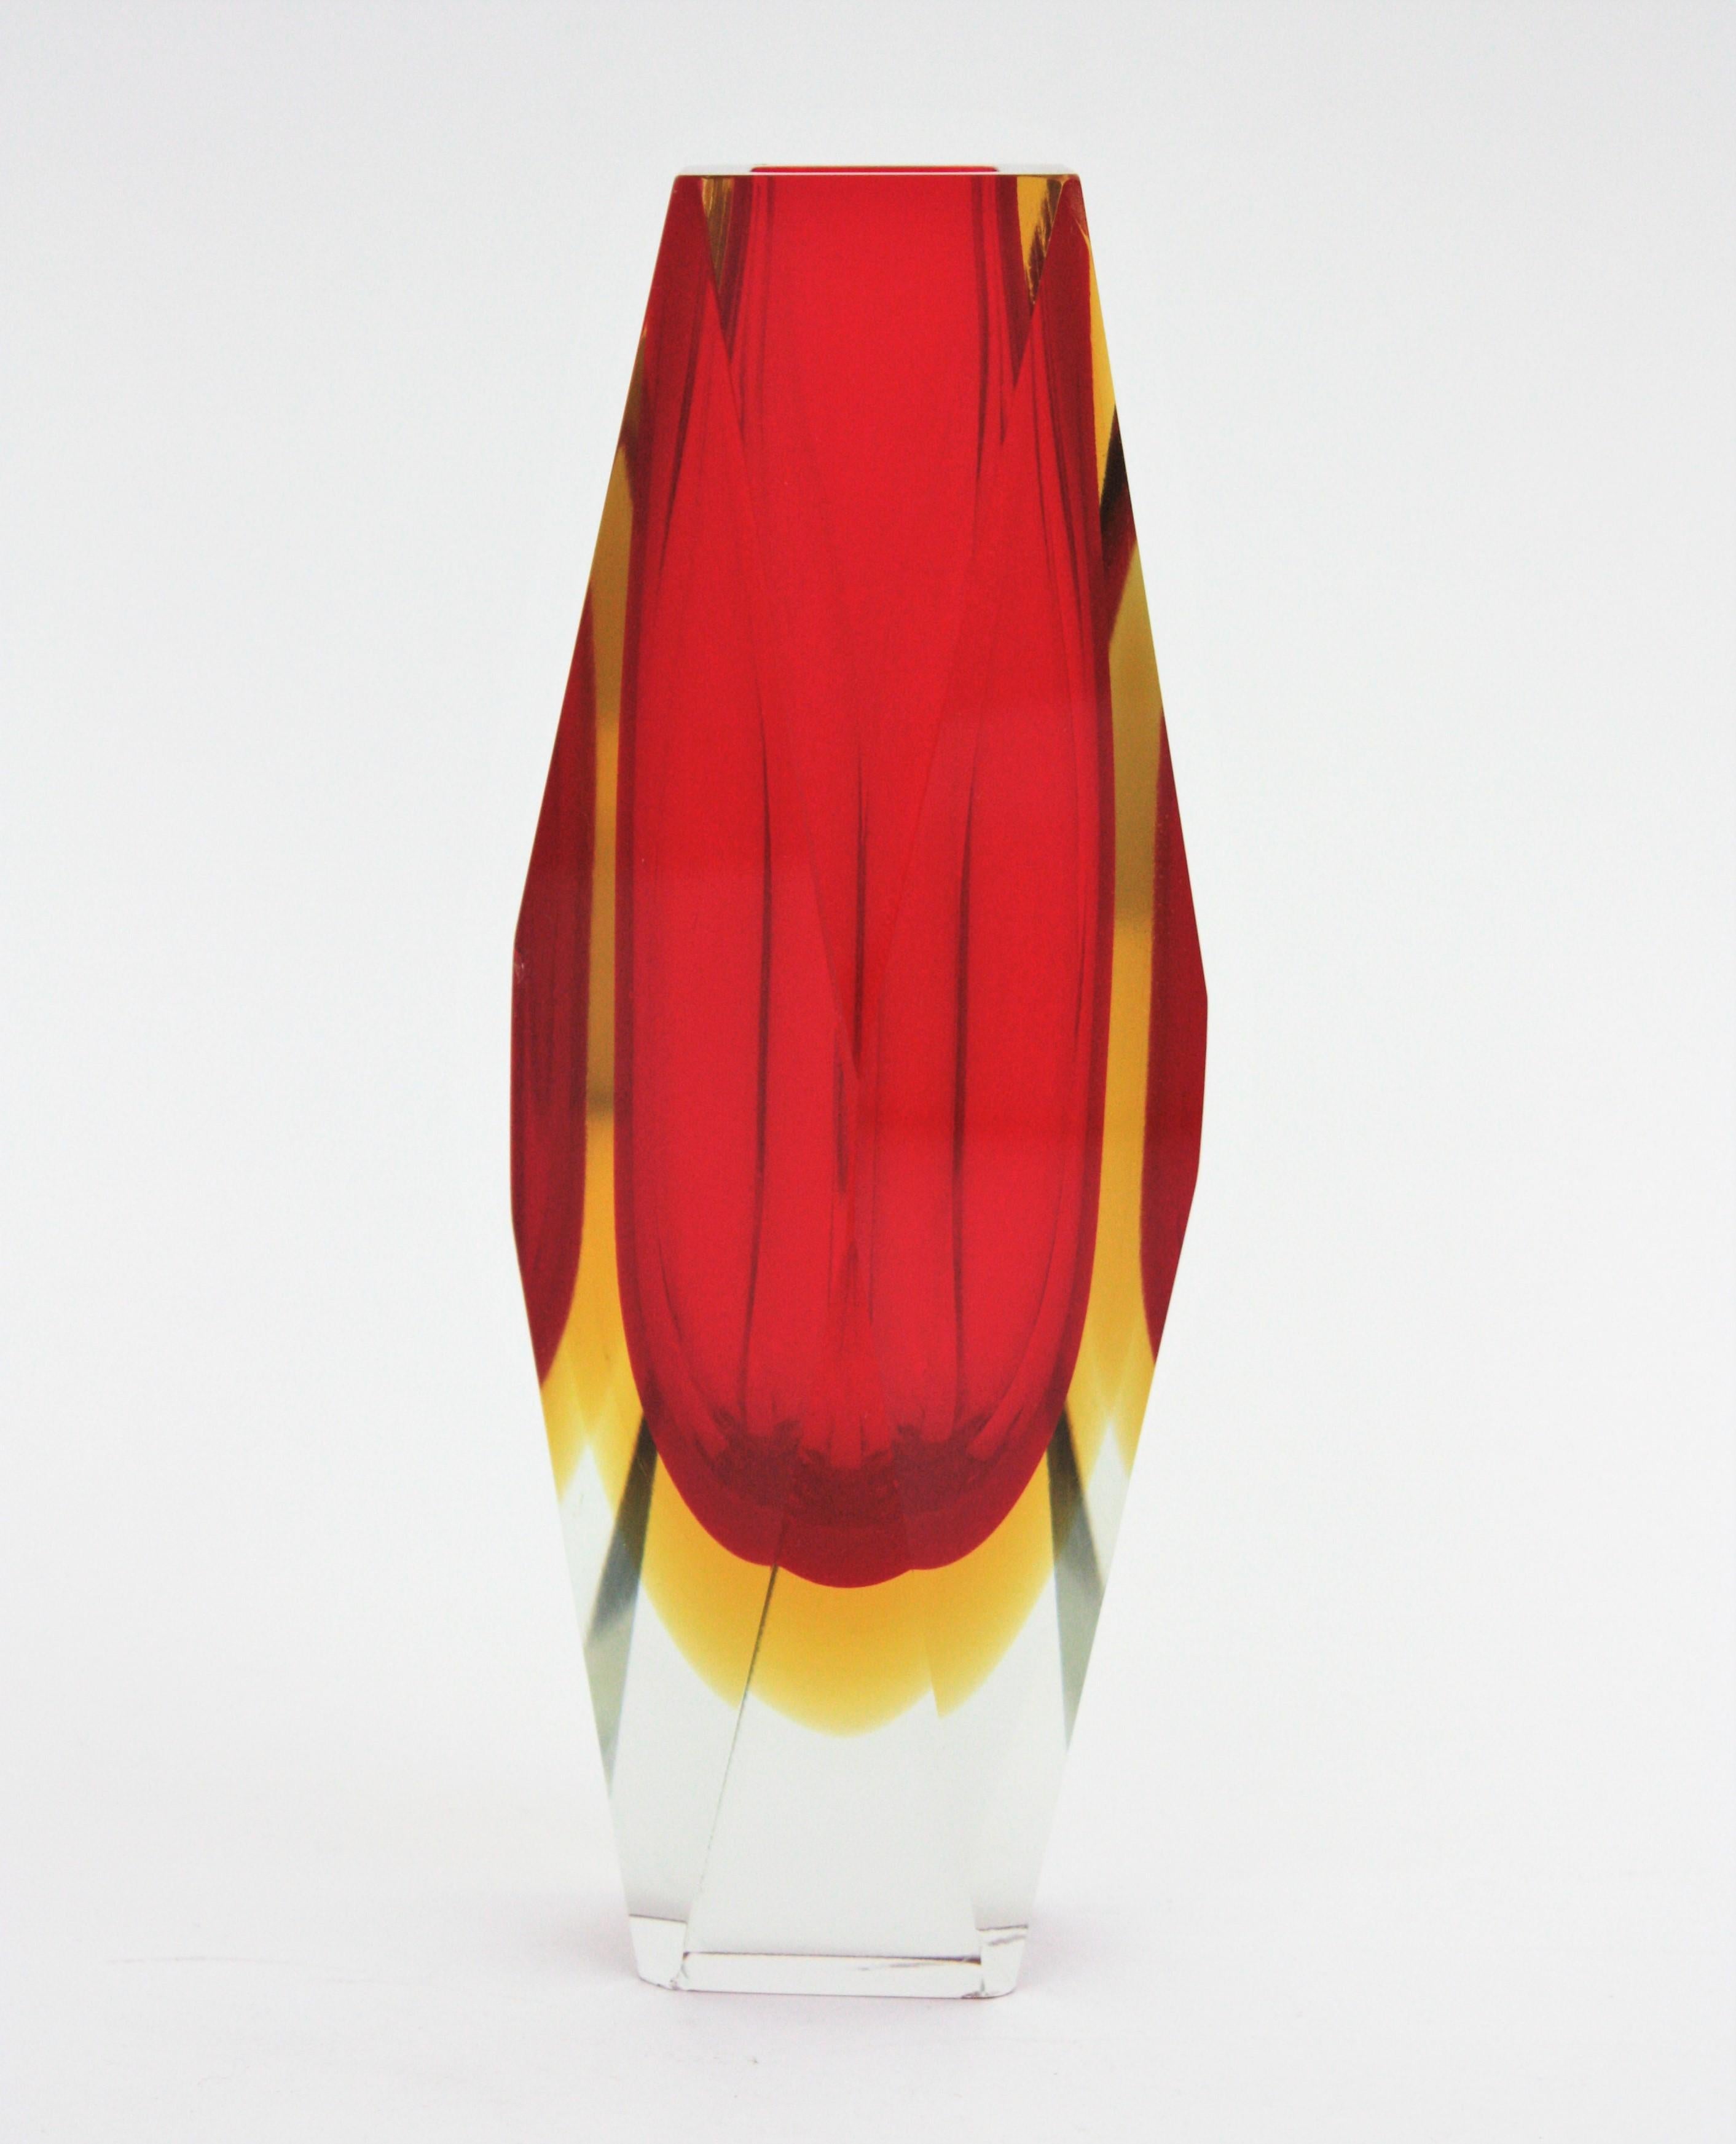 A beautiful 25 cm height faceted Sommerso double cased red and yellow Murano glass vase. Attributed to Mandruzzato, Italy, 1960s
Red glass with a layer of yellow glass cased into clear glass. The vibrant red color is eye-catching.
Beautiful to be